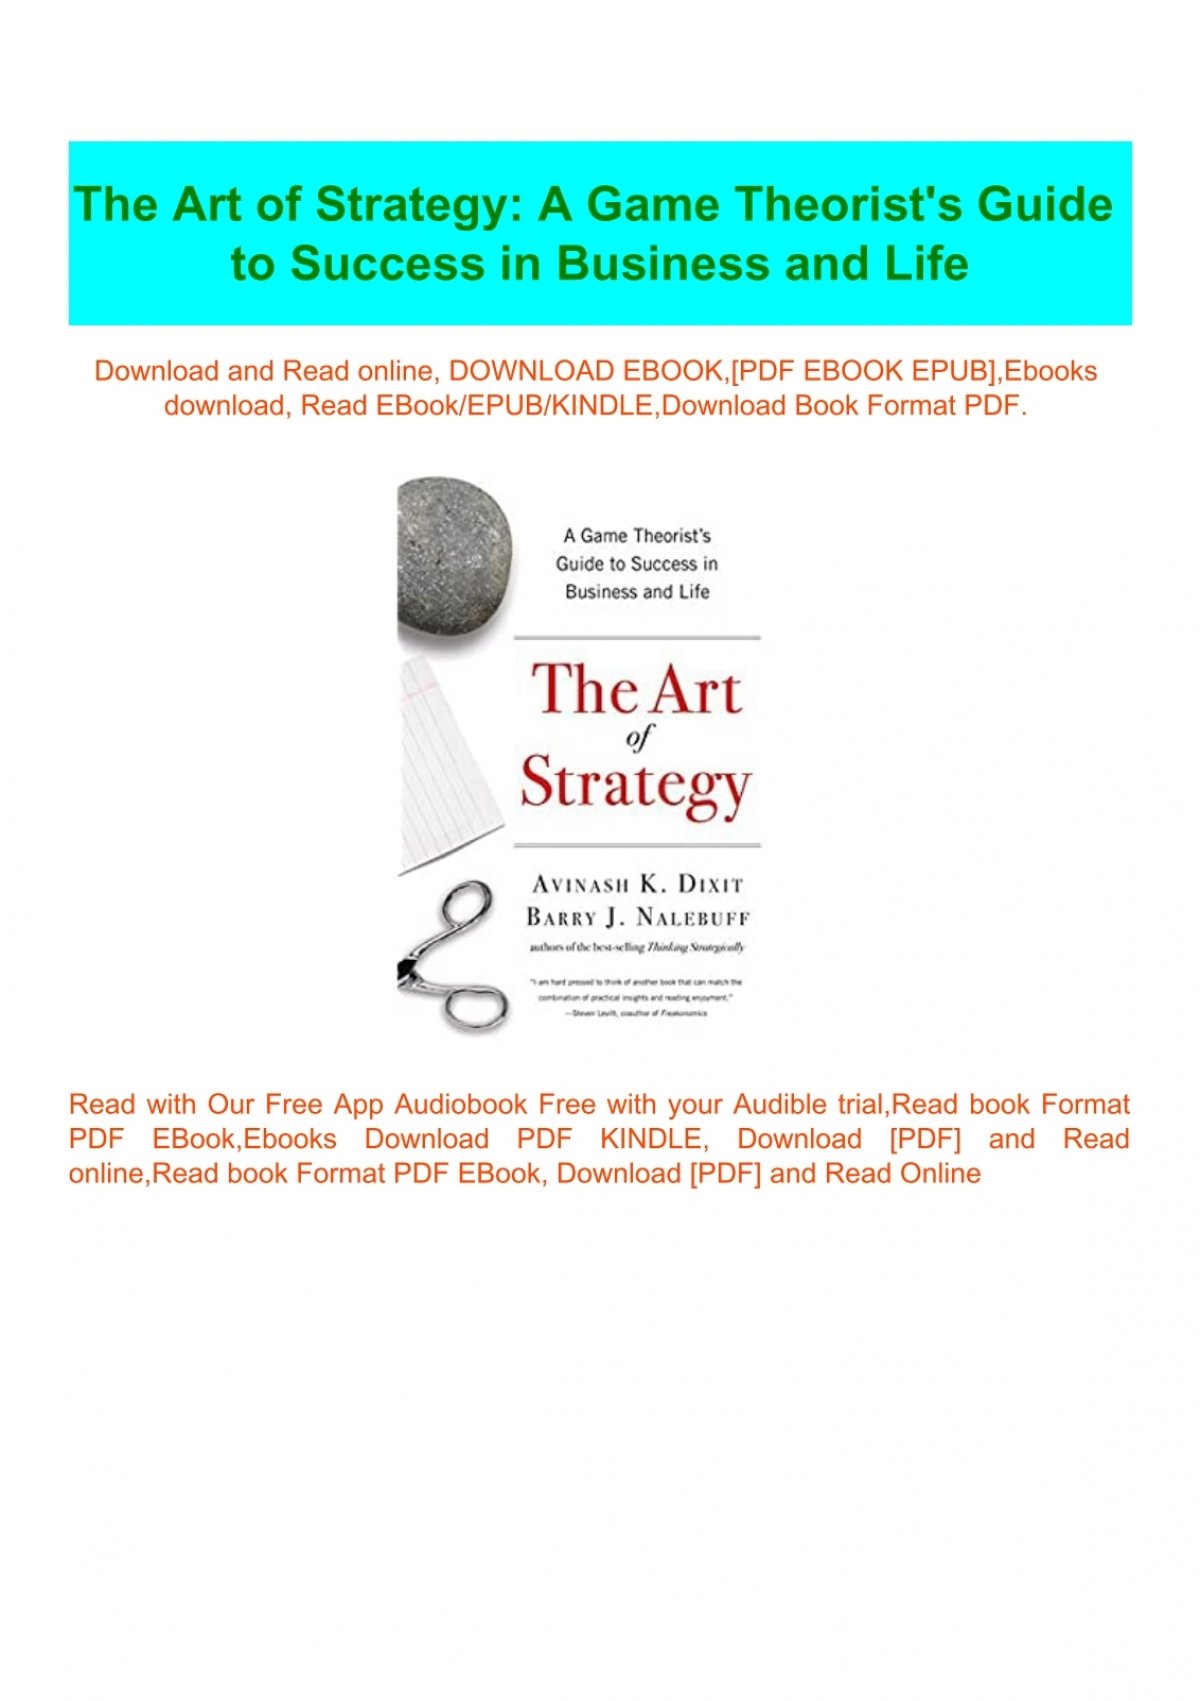 The Art of Strategy Book Summary